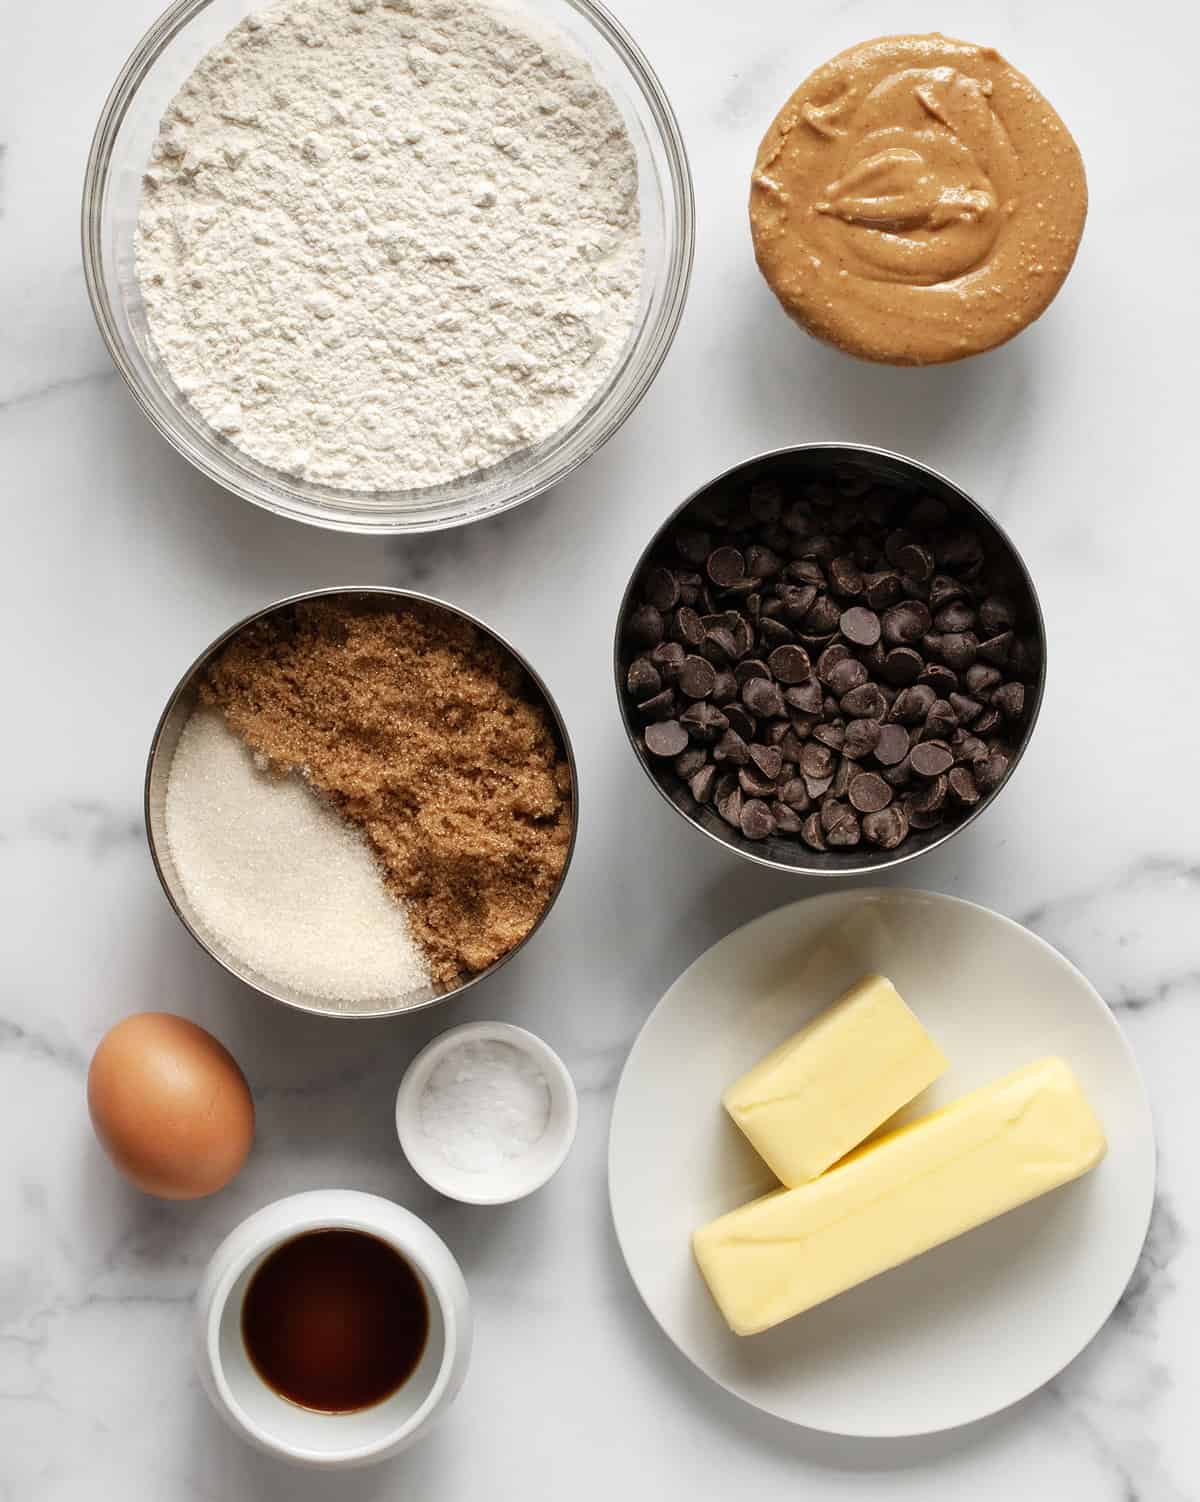 Ingredients including flour, peanut butter, granulated sugar, brown sugar, chocolate chips, butter, egg, salt, baking soda and vanilla extract.